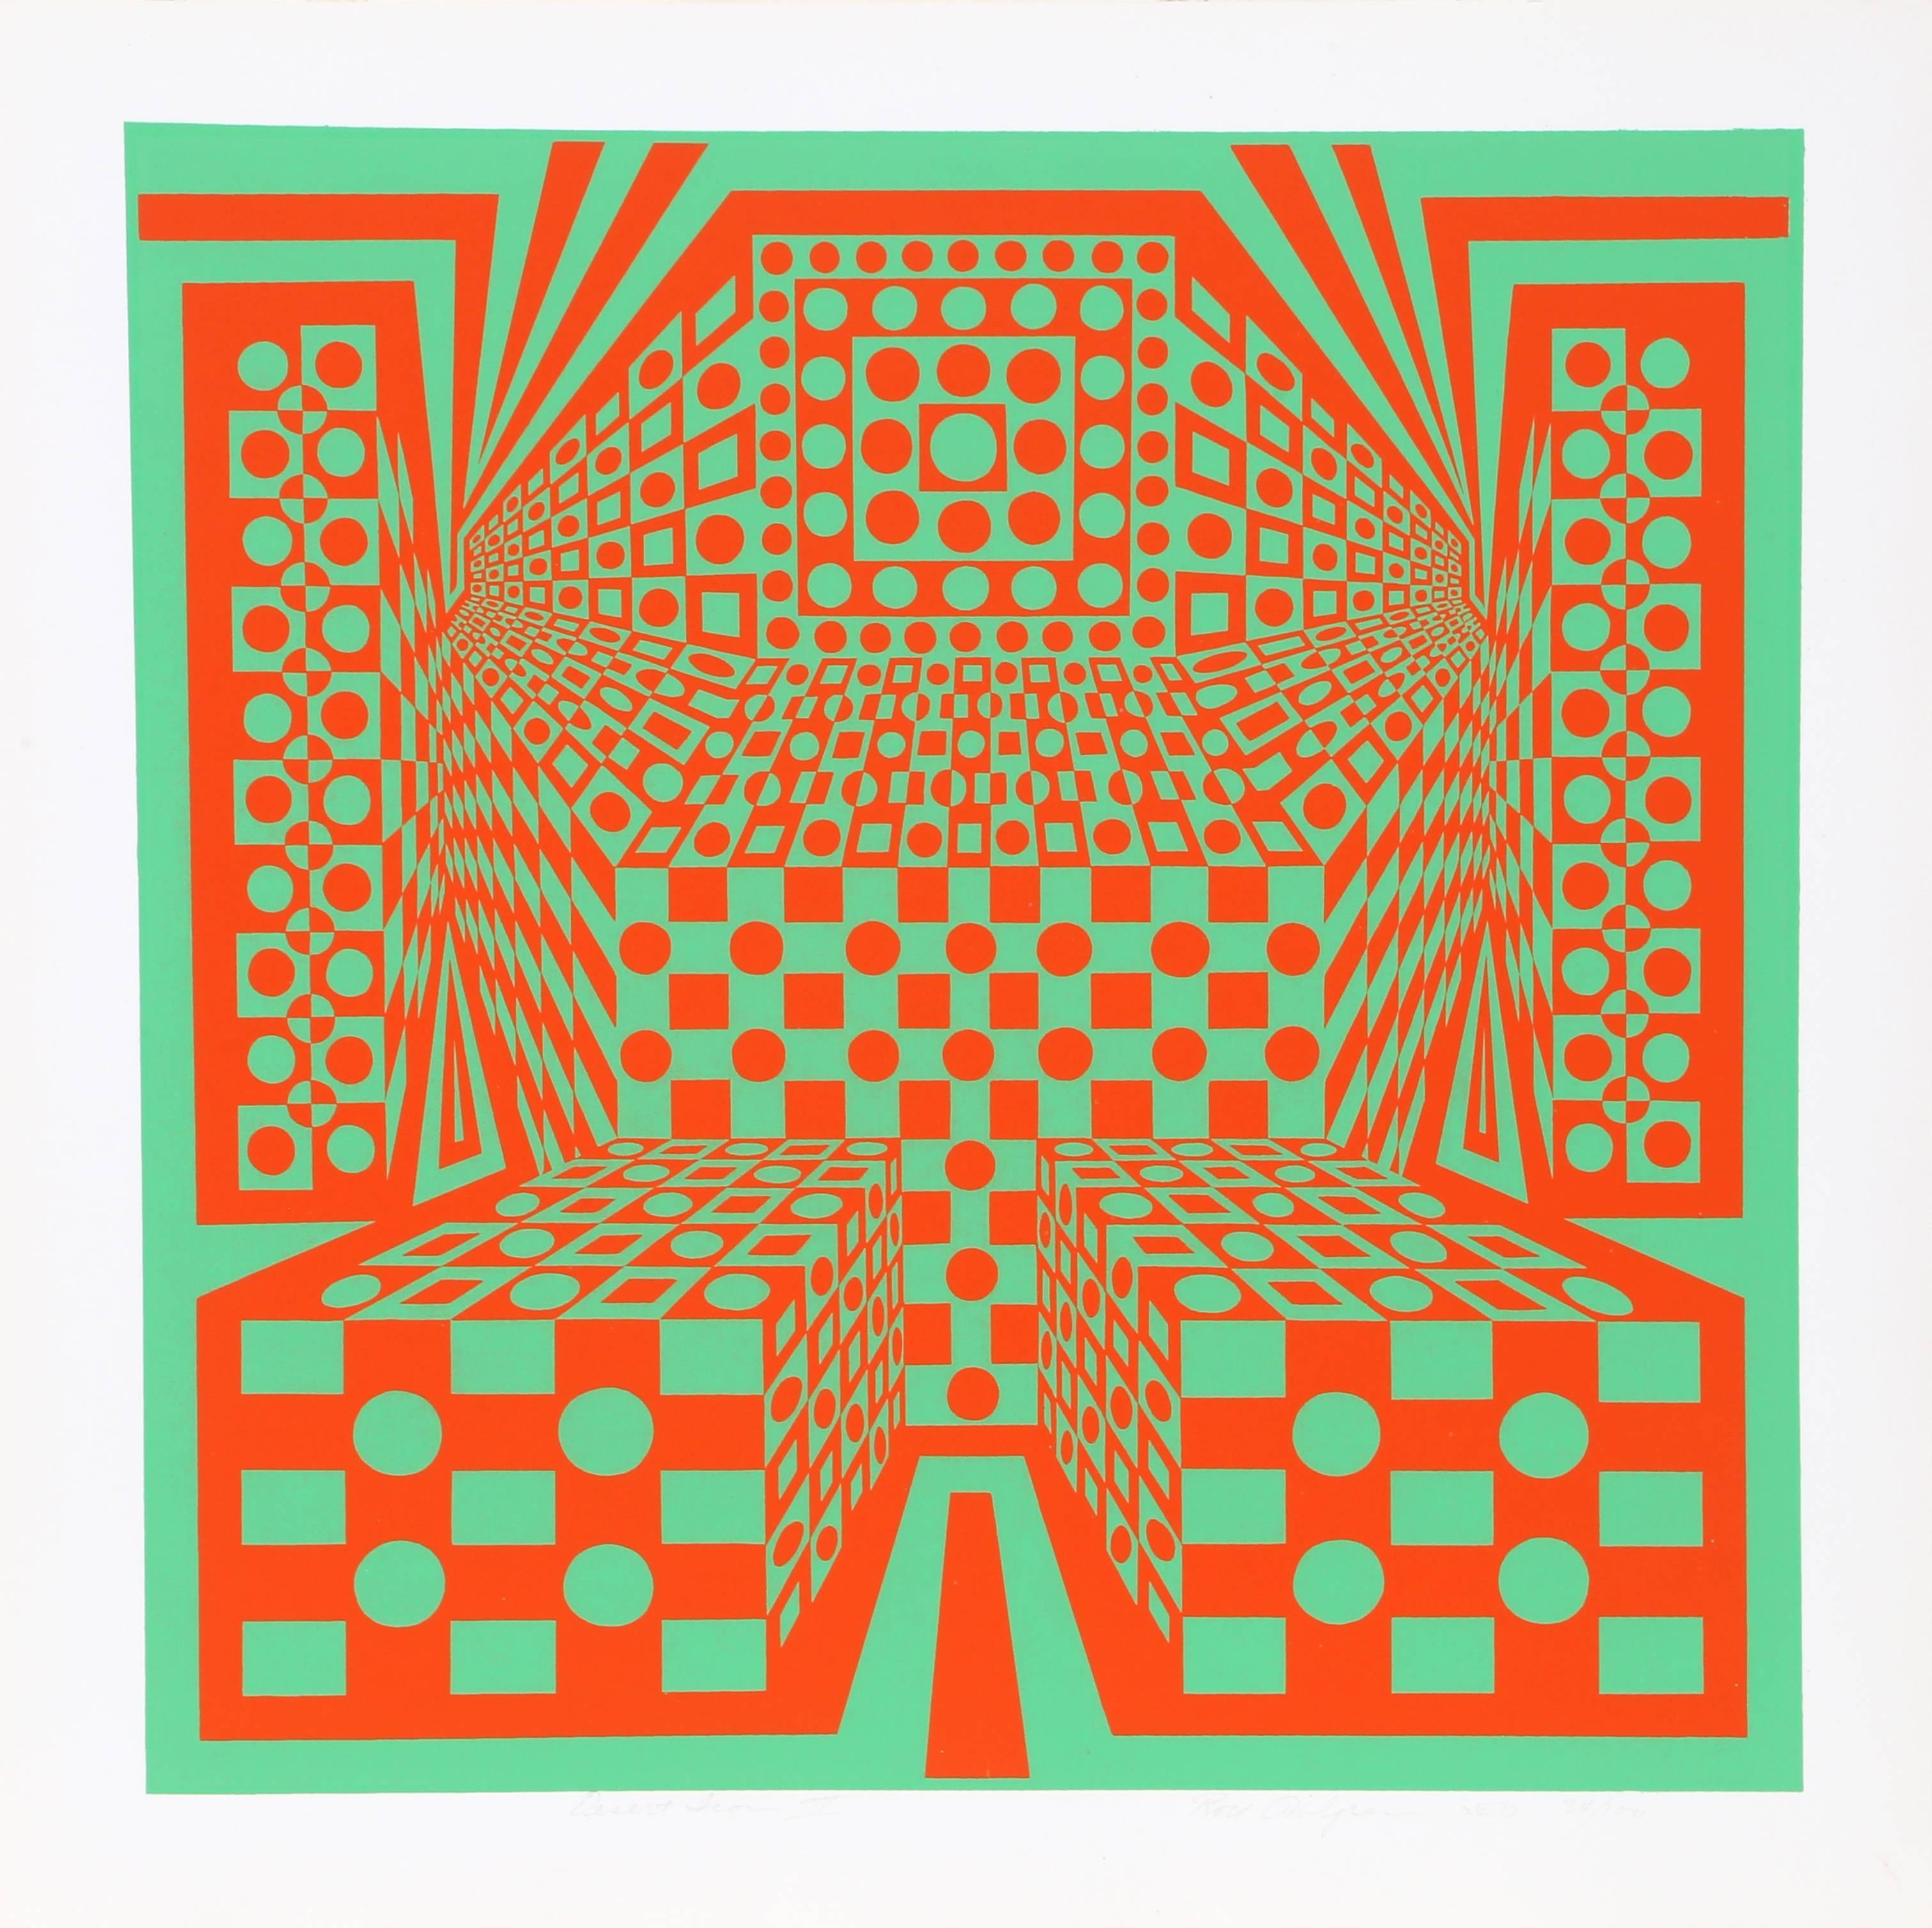 This grid of squares and circles quickly folds in on itself and seems to warp the fabric of space around it. Perfectly symmetrical, this print gives the illusion of diving headfirst into an old computer modem or a simulation just starting to stretch